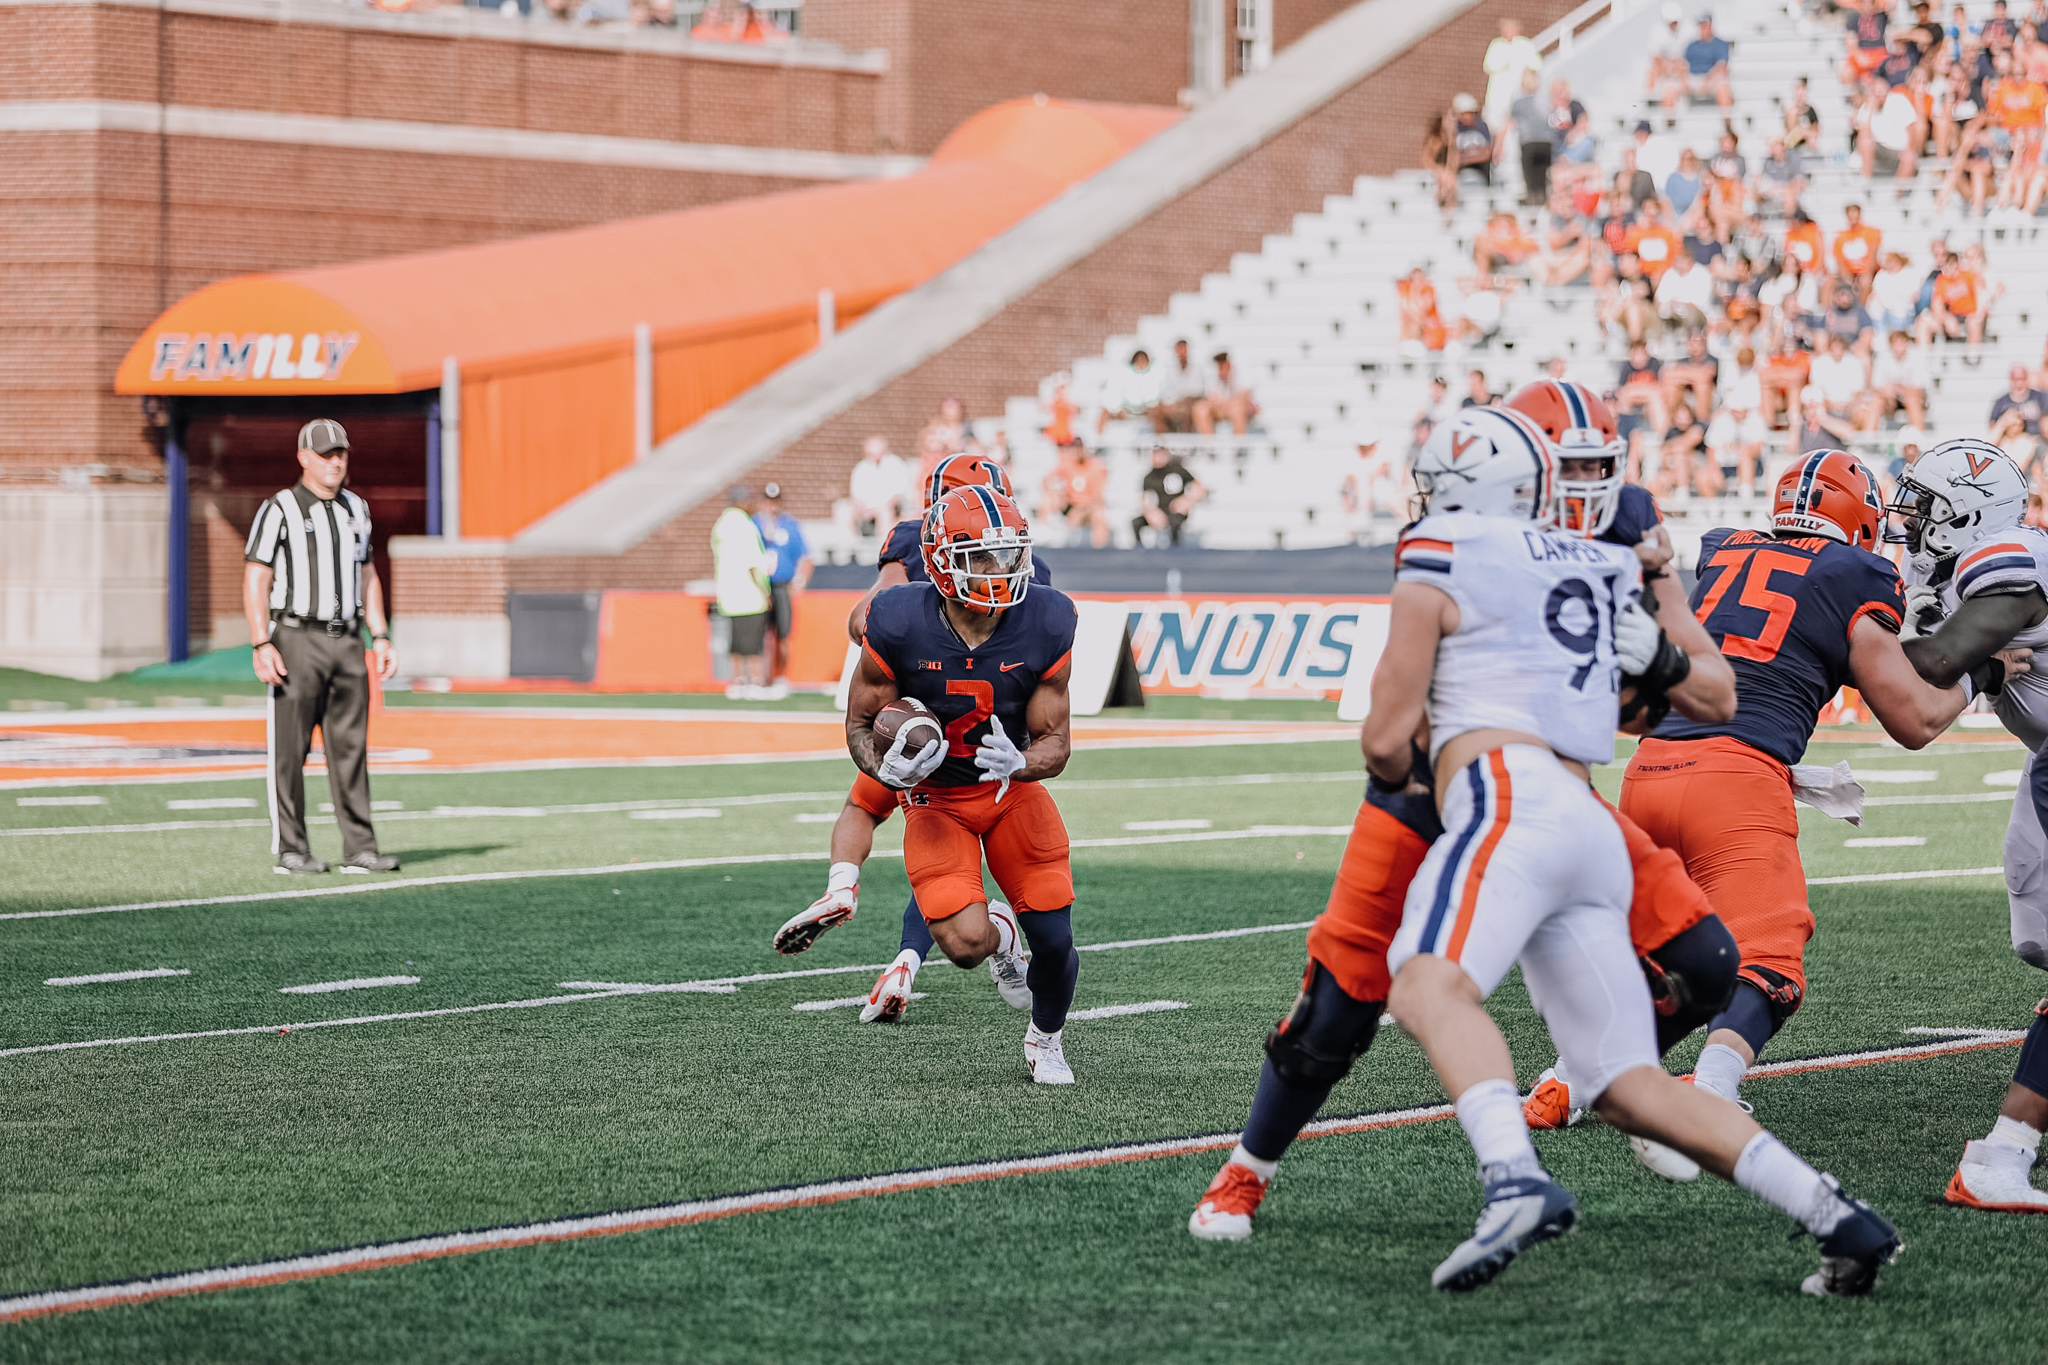 Game Preview: Illini Trying to Avoid FCS Upset